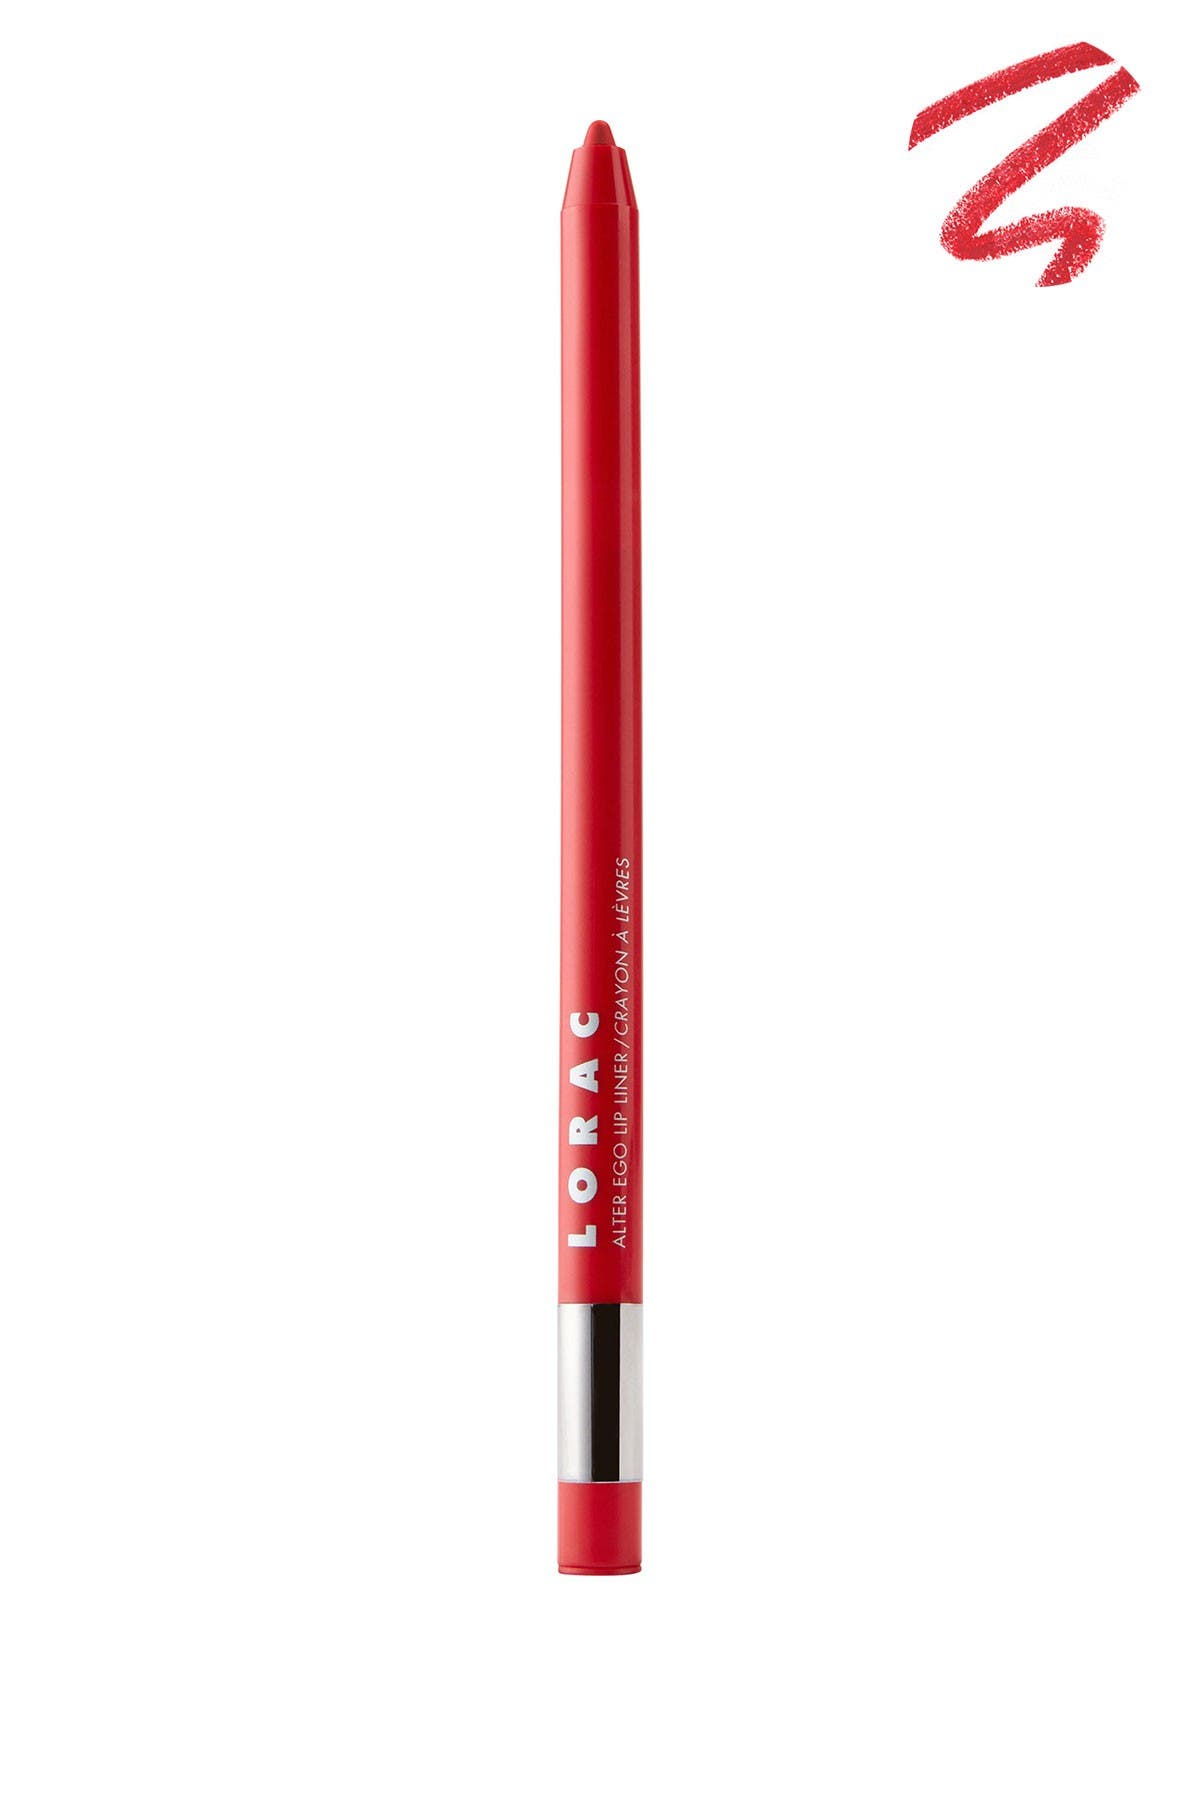 Lorac Alter Ego Lip Liner In Pin Up